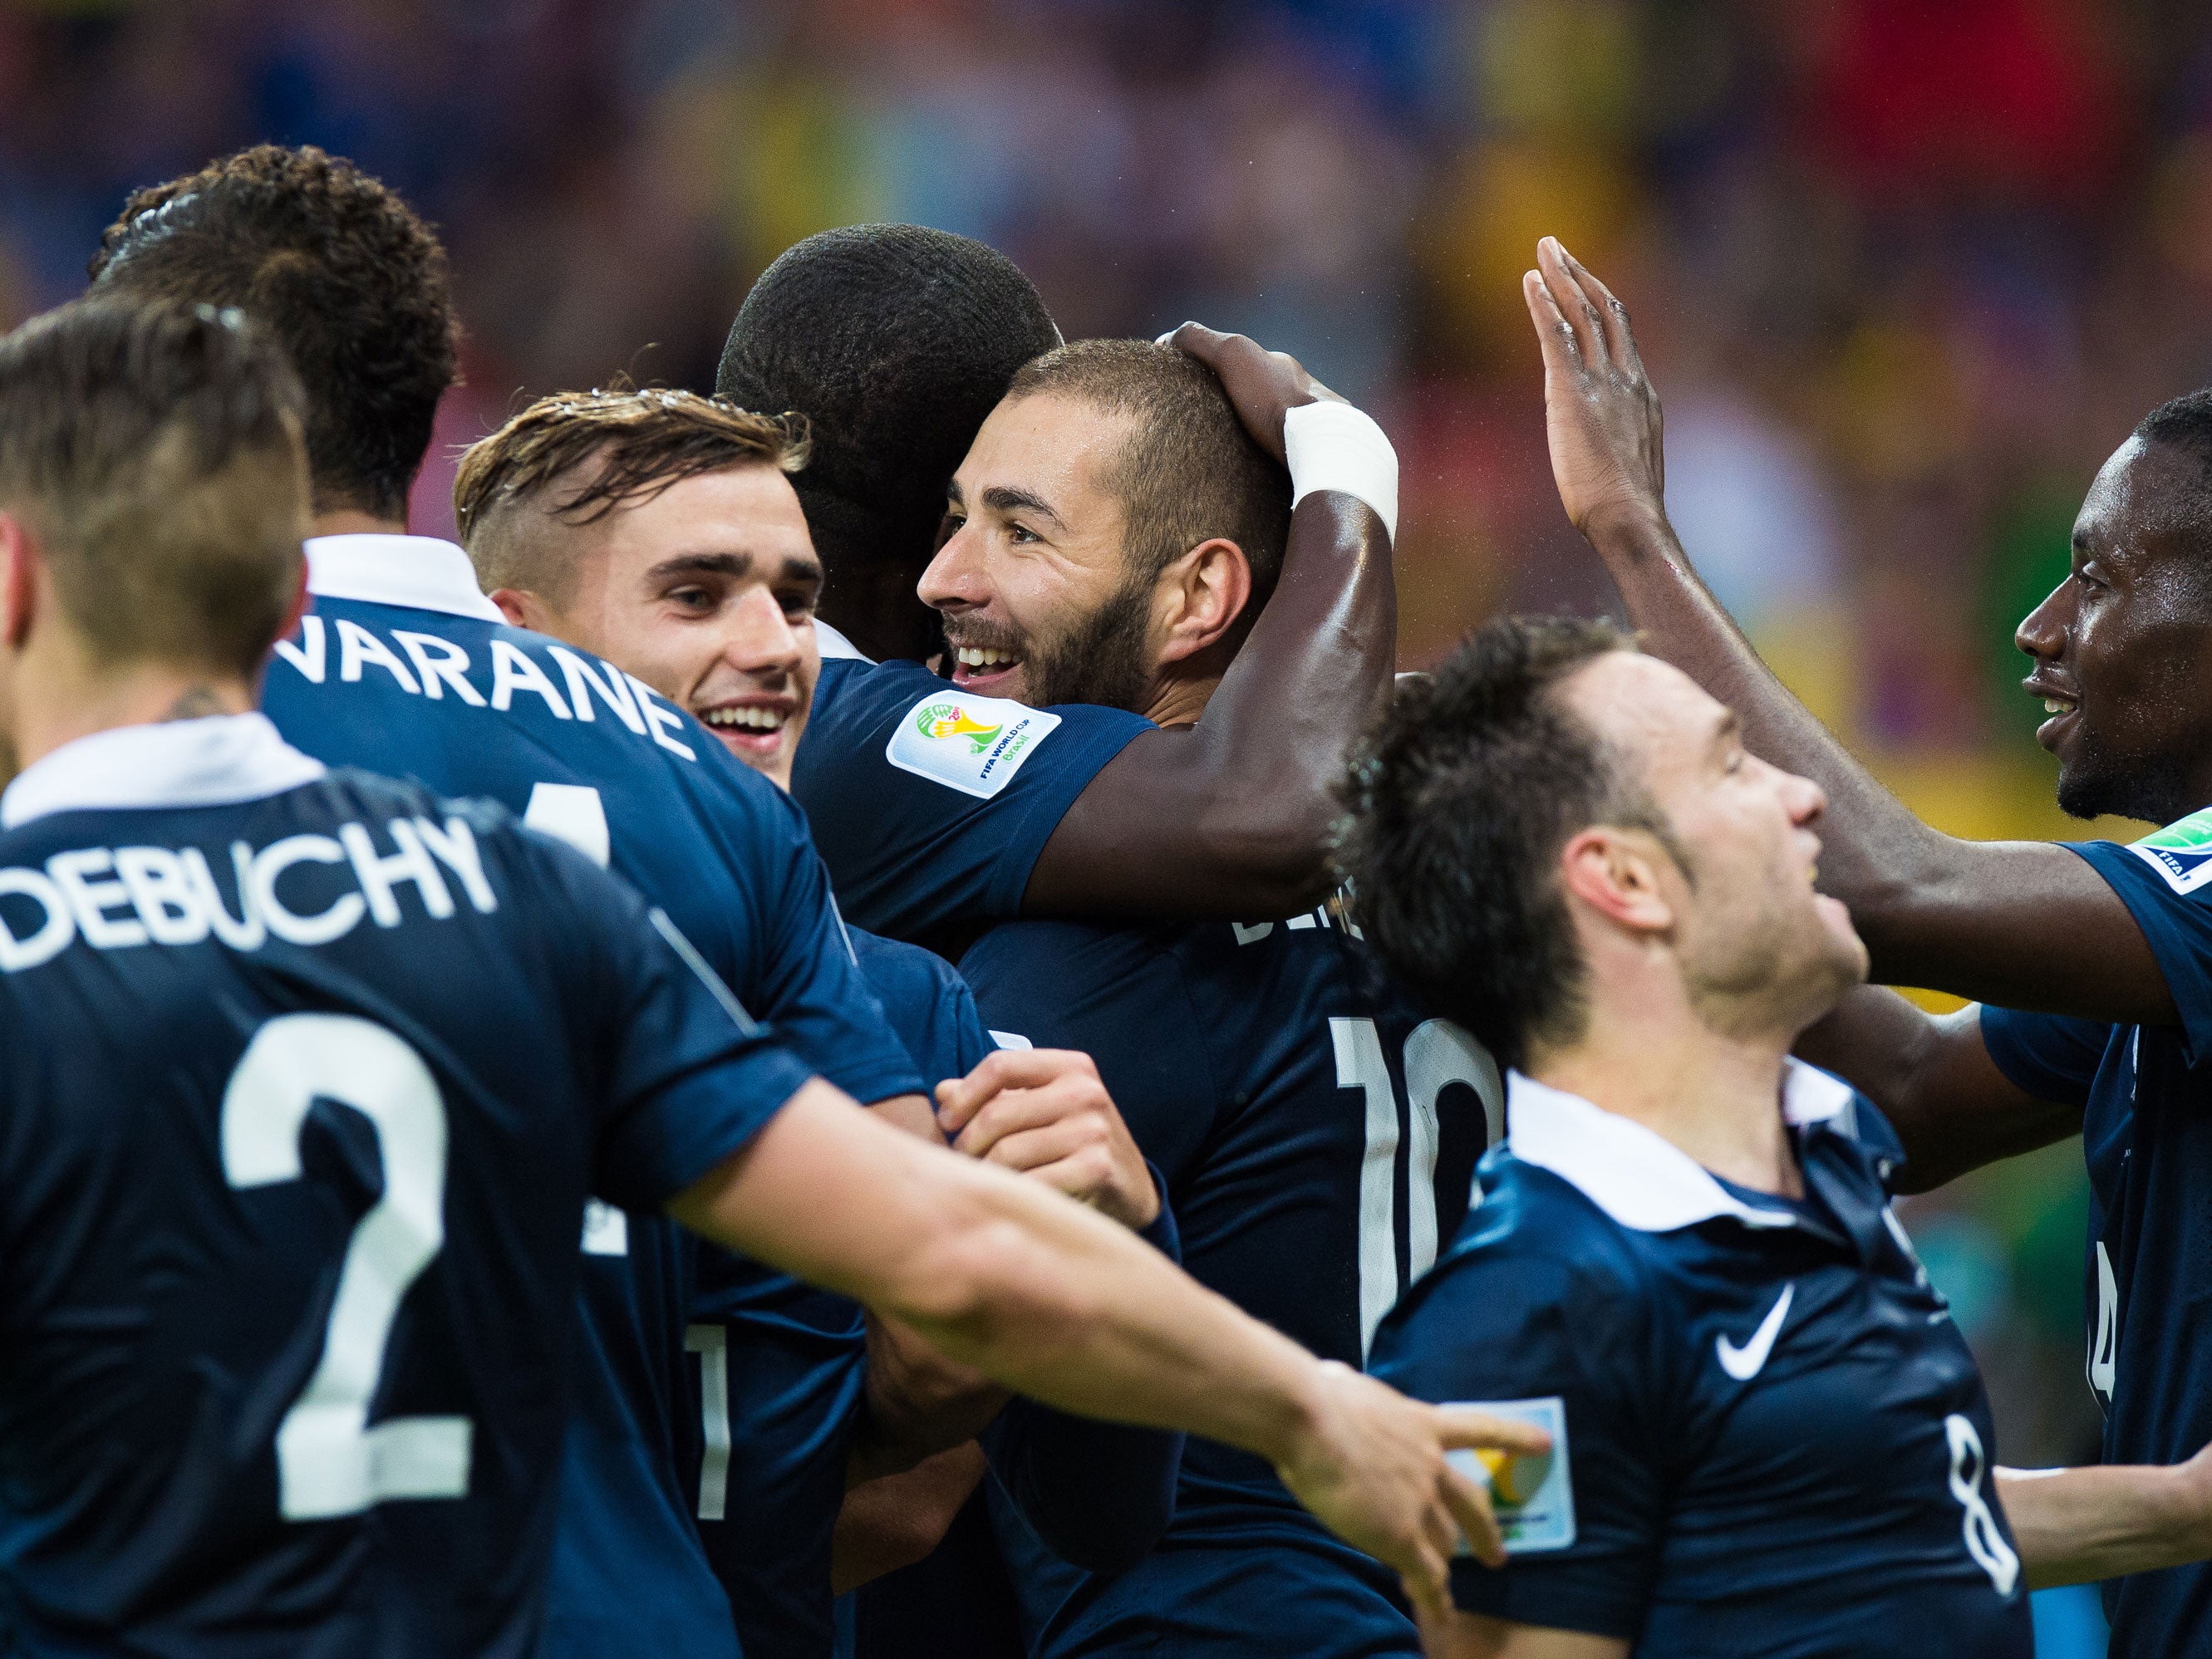 France celebrate their third goal during the World Cup Group E match between France and Honduras at Estadio Beira-Rio on June 15, 2014 in Porto Alegre, Brazil.